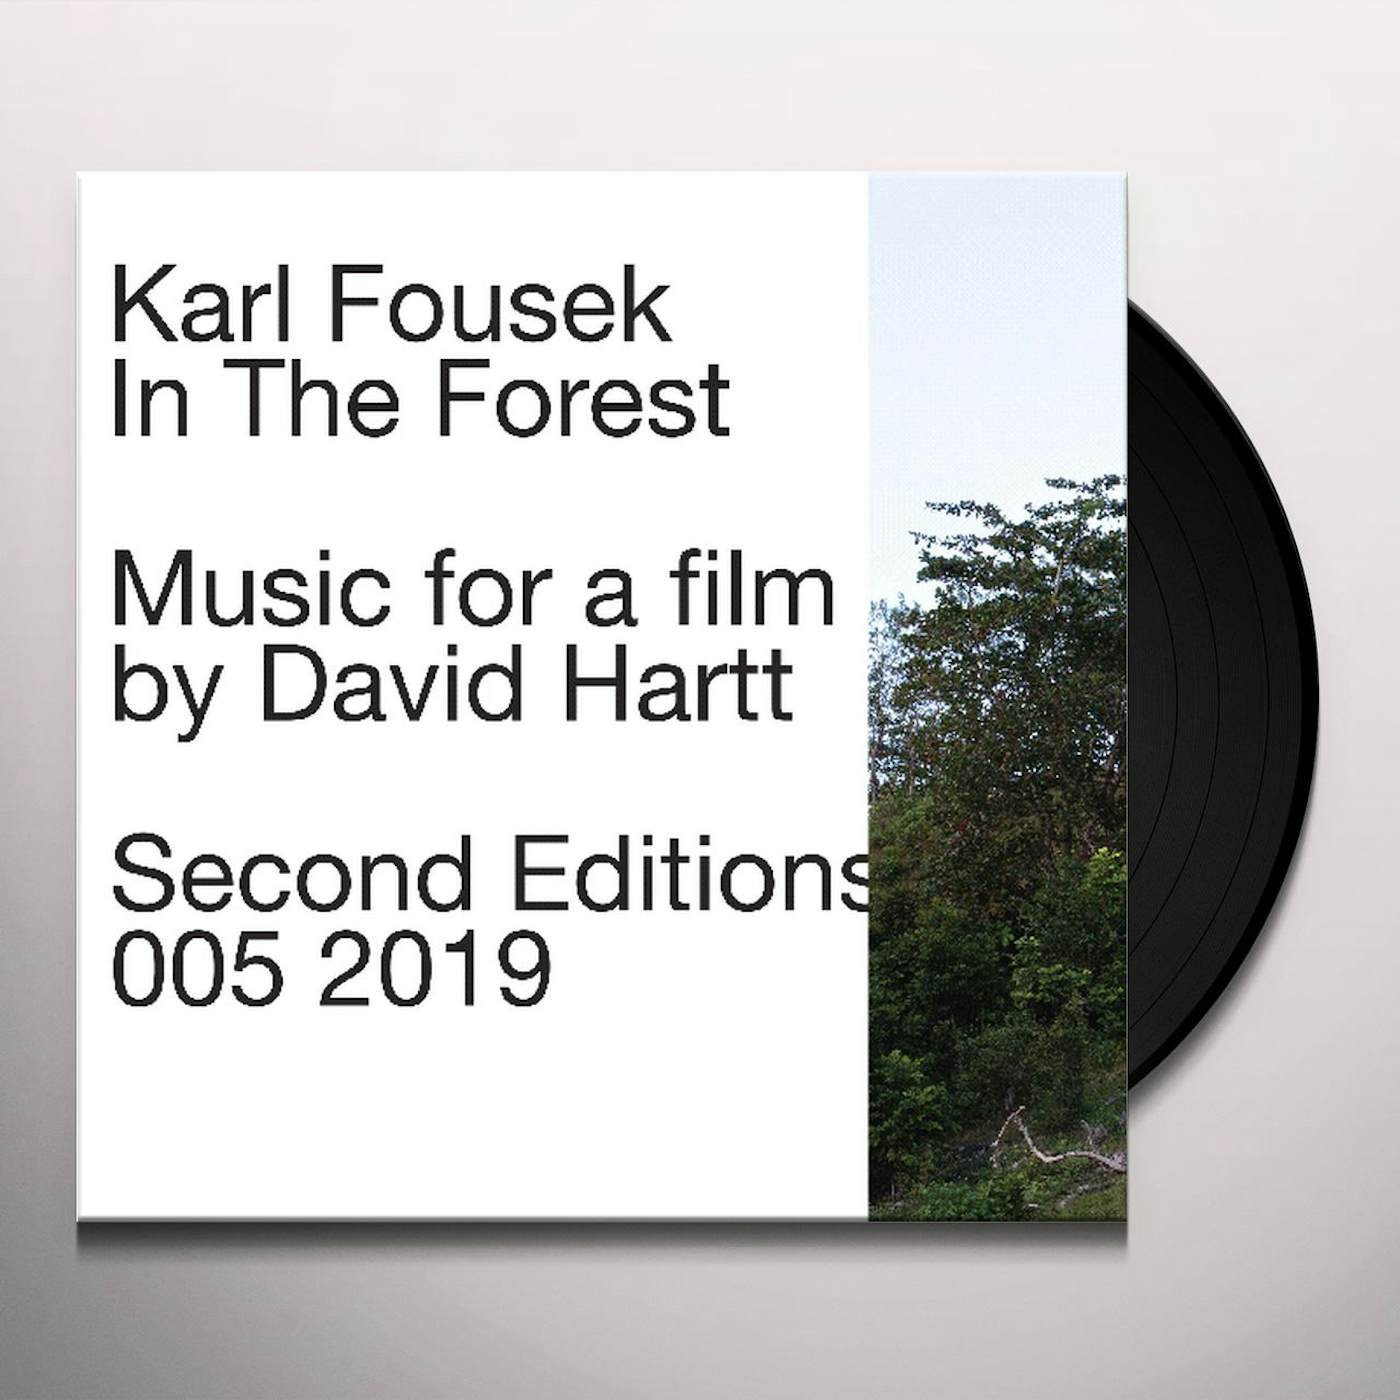 Karl Fousek In The Forest Vinyl Record